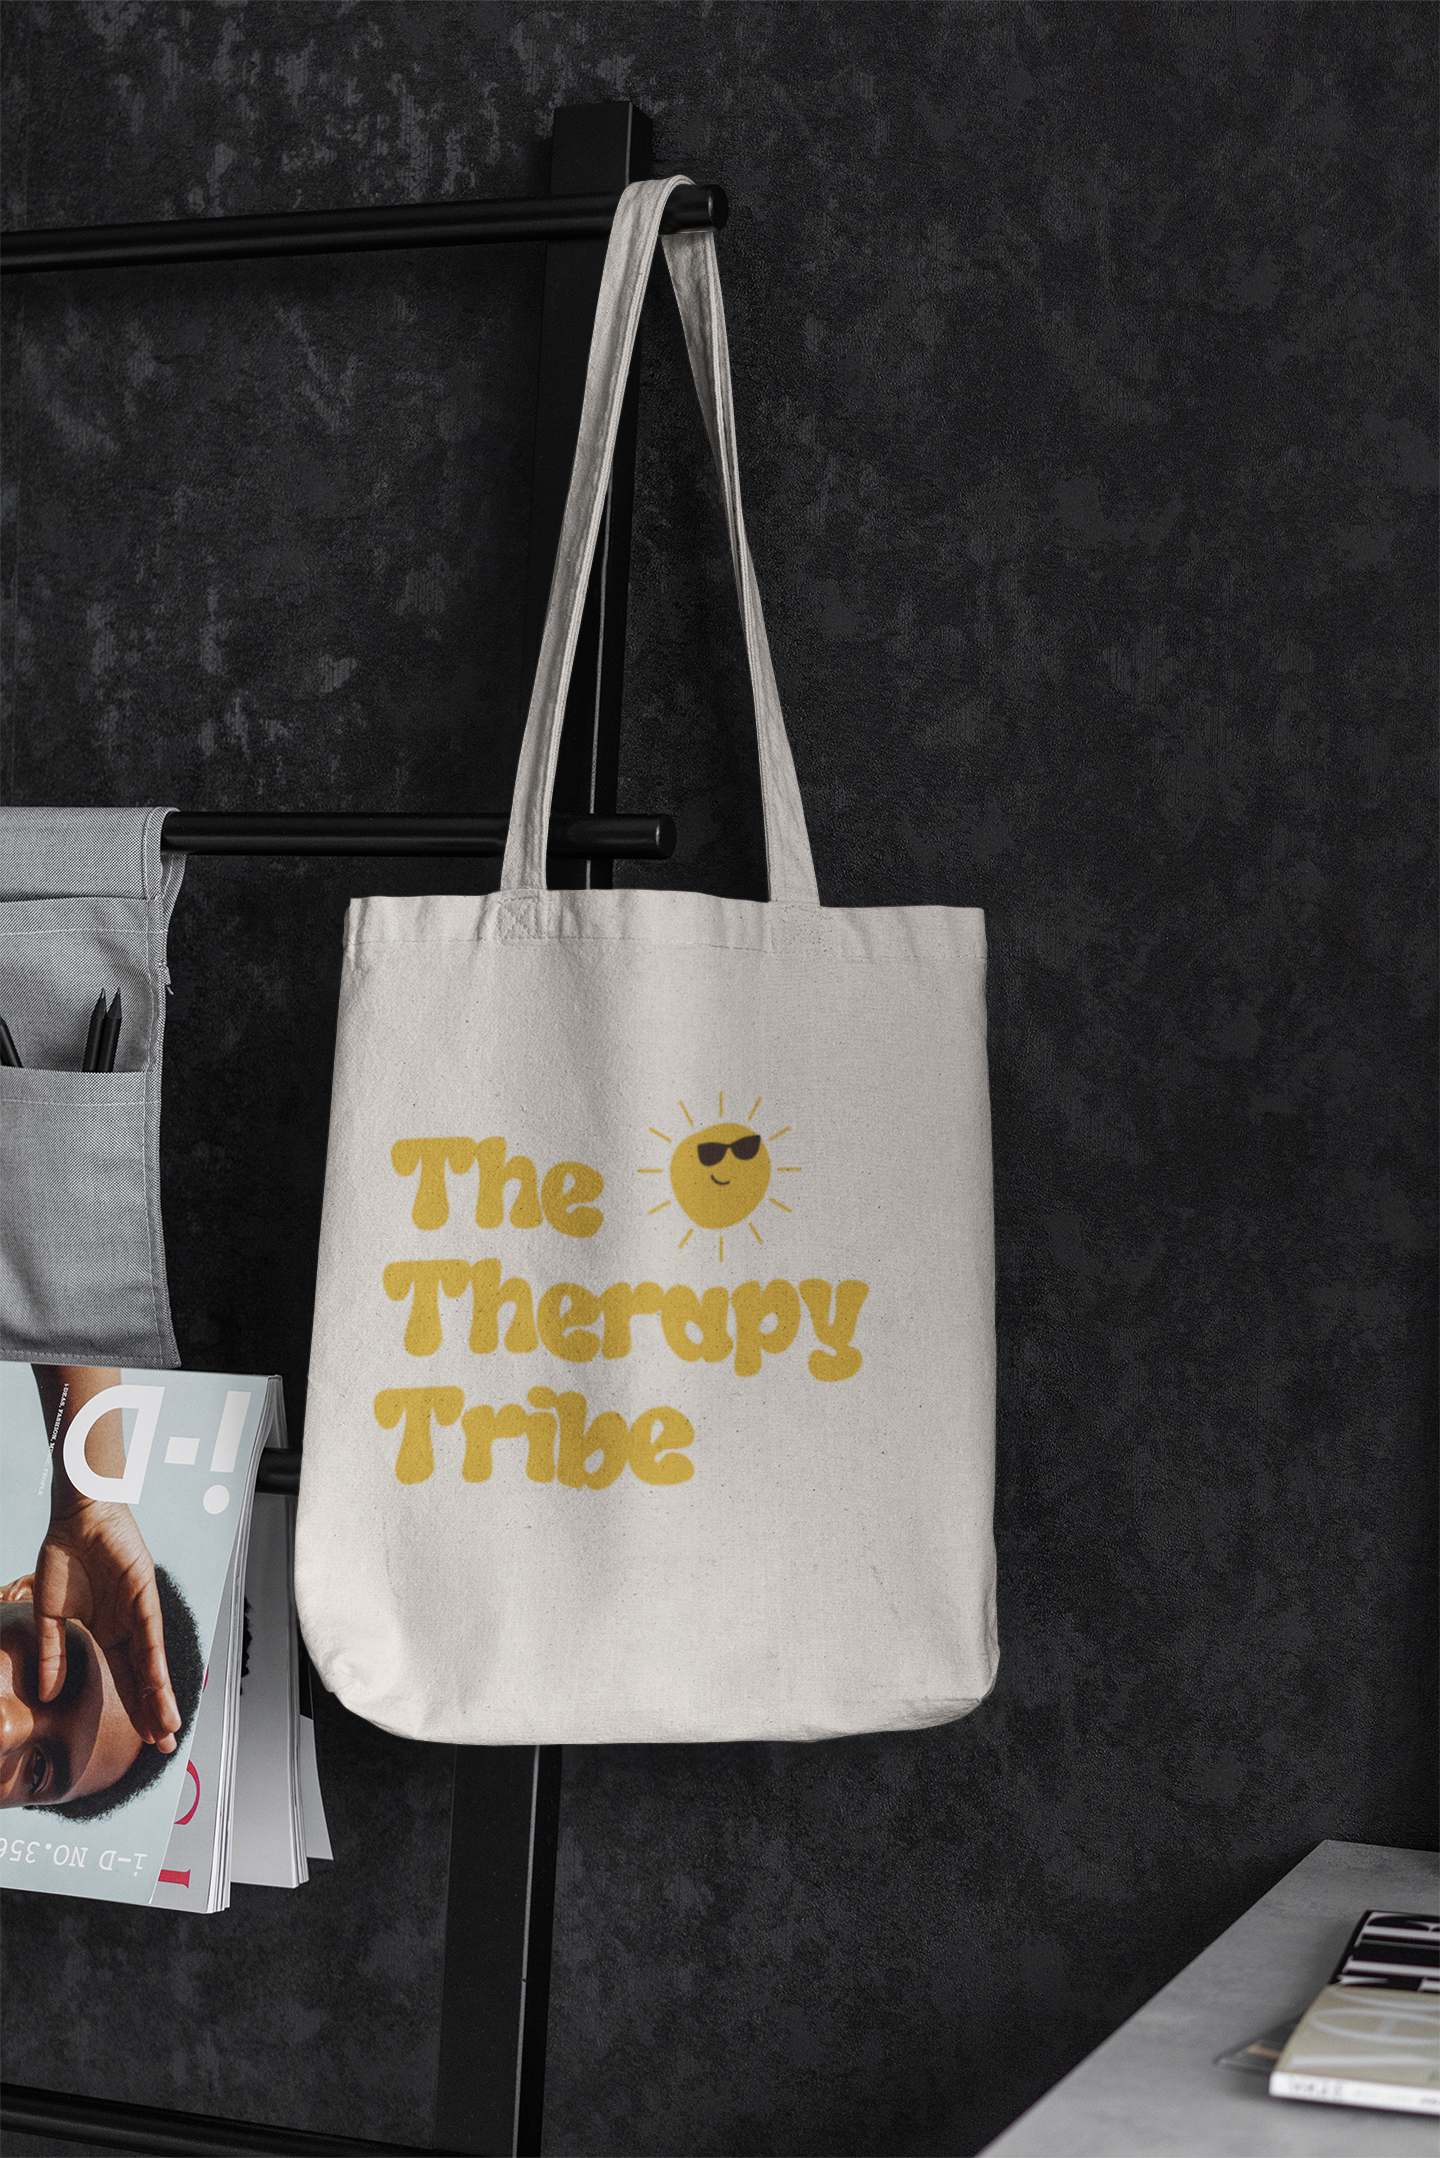 The Therapy Tribe Tote Bag